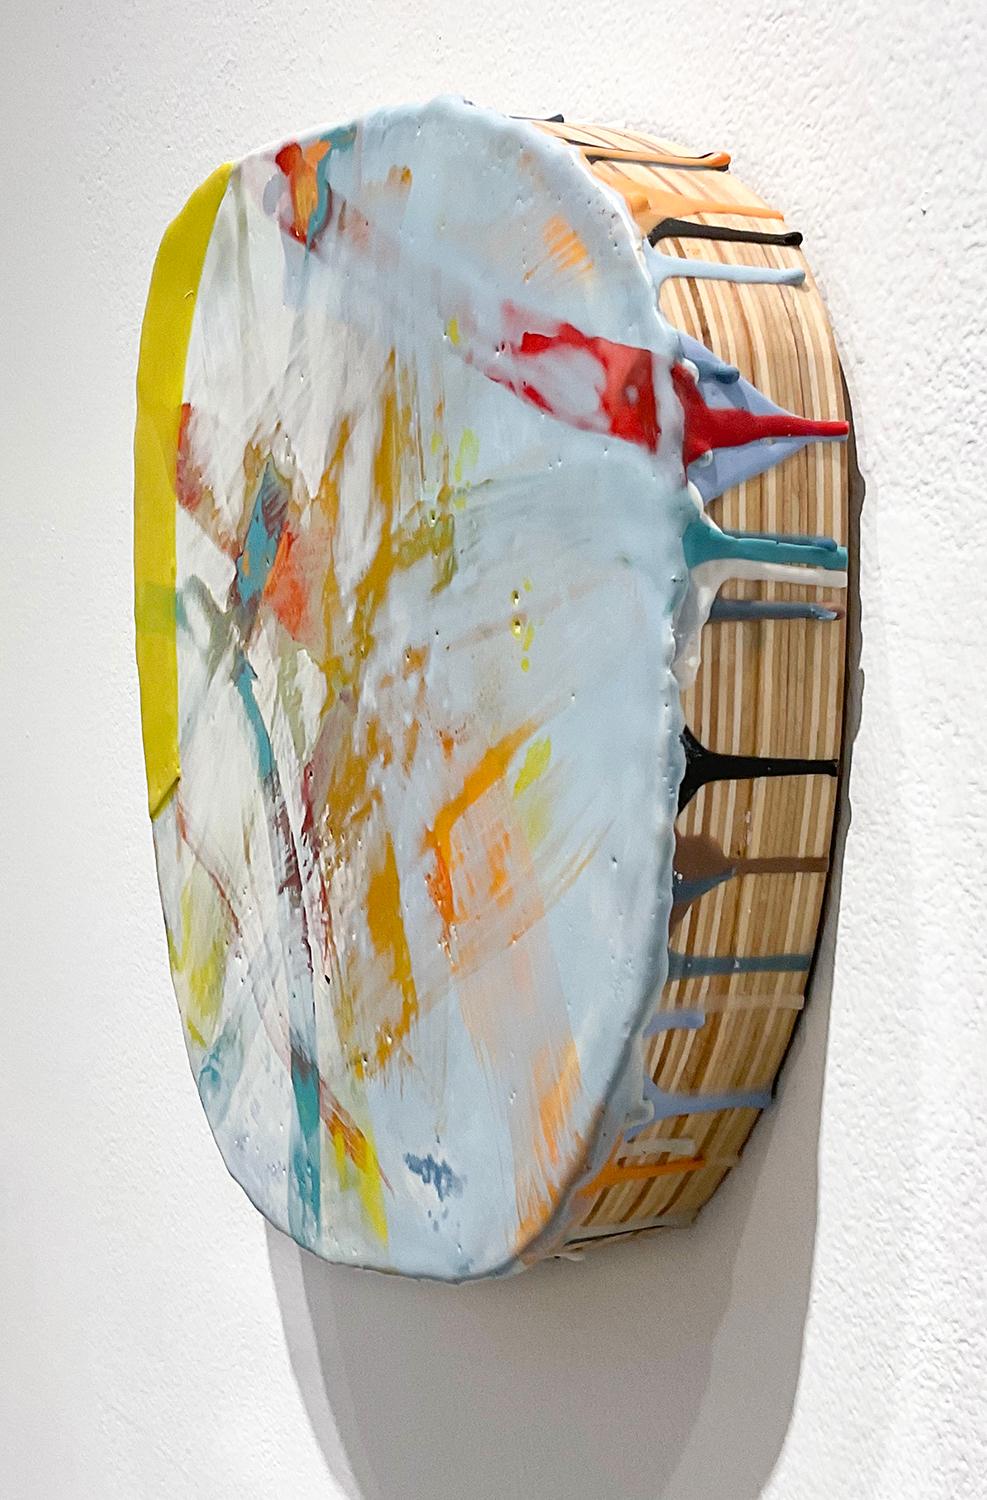 Abstract expressionist style three dimensional wall sculpture with gestural applications of pastel blue, yellow, green, teal, orange, and white encaustic on a hand-carved round wood panel
